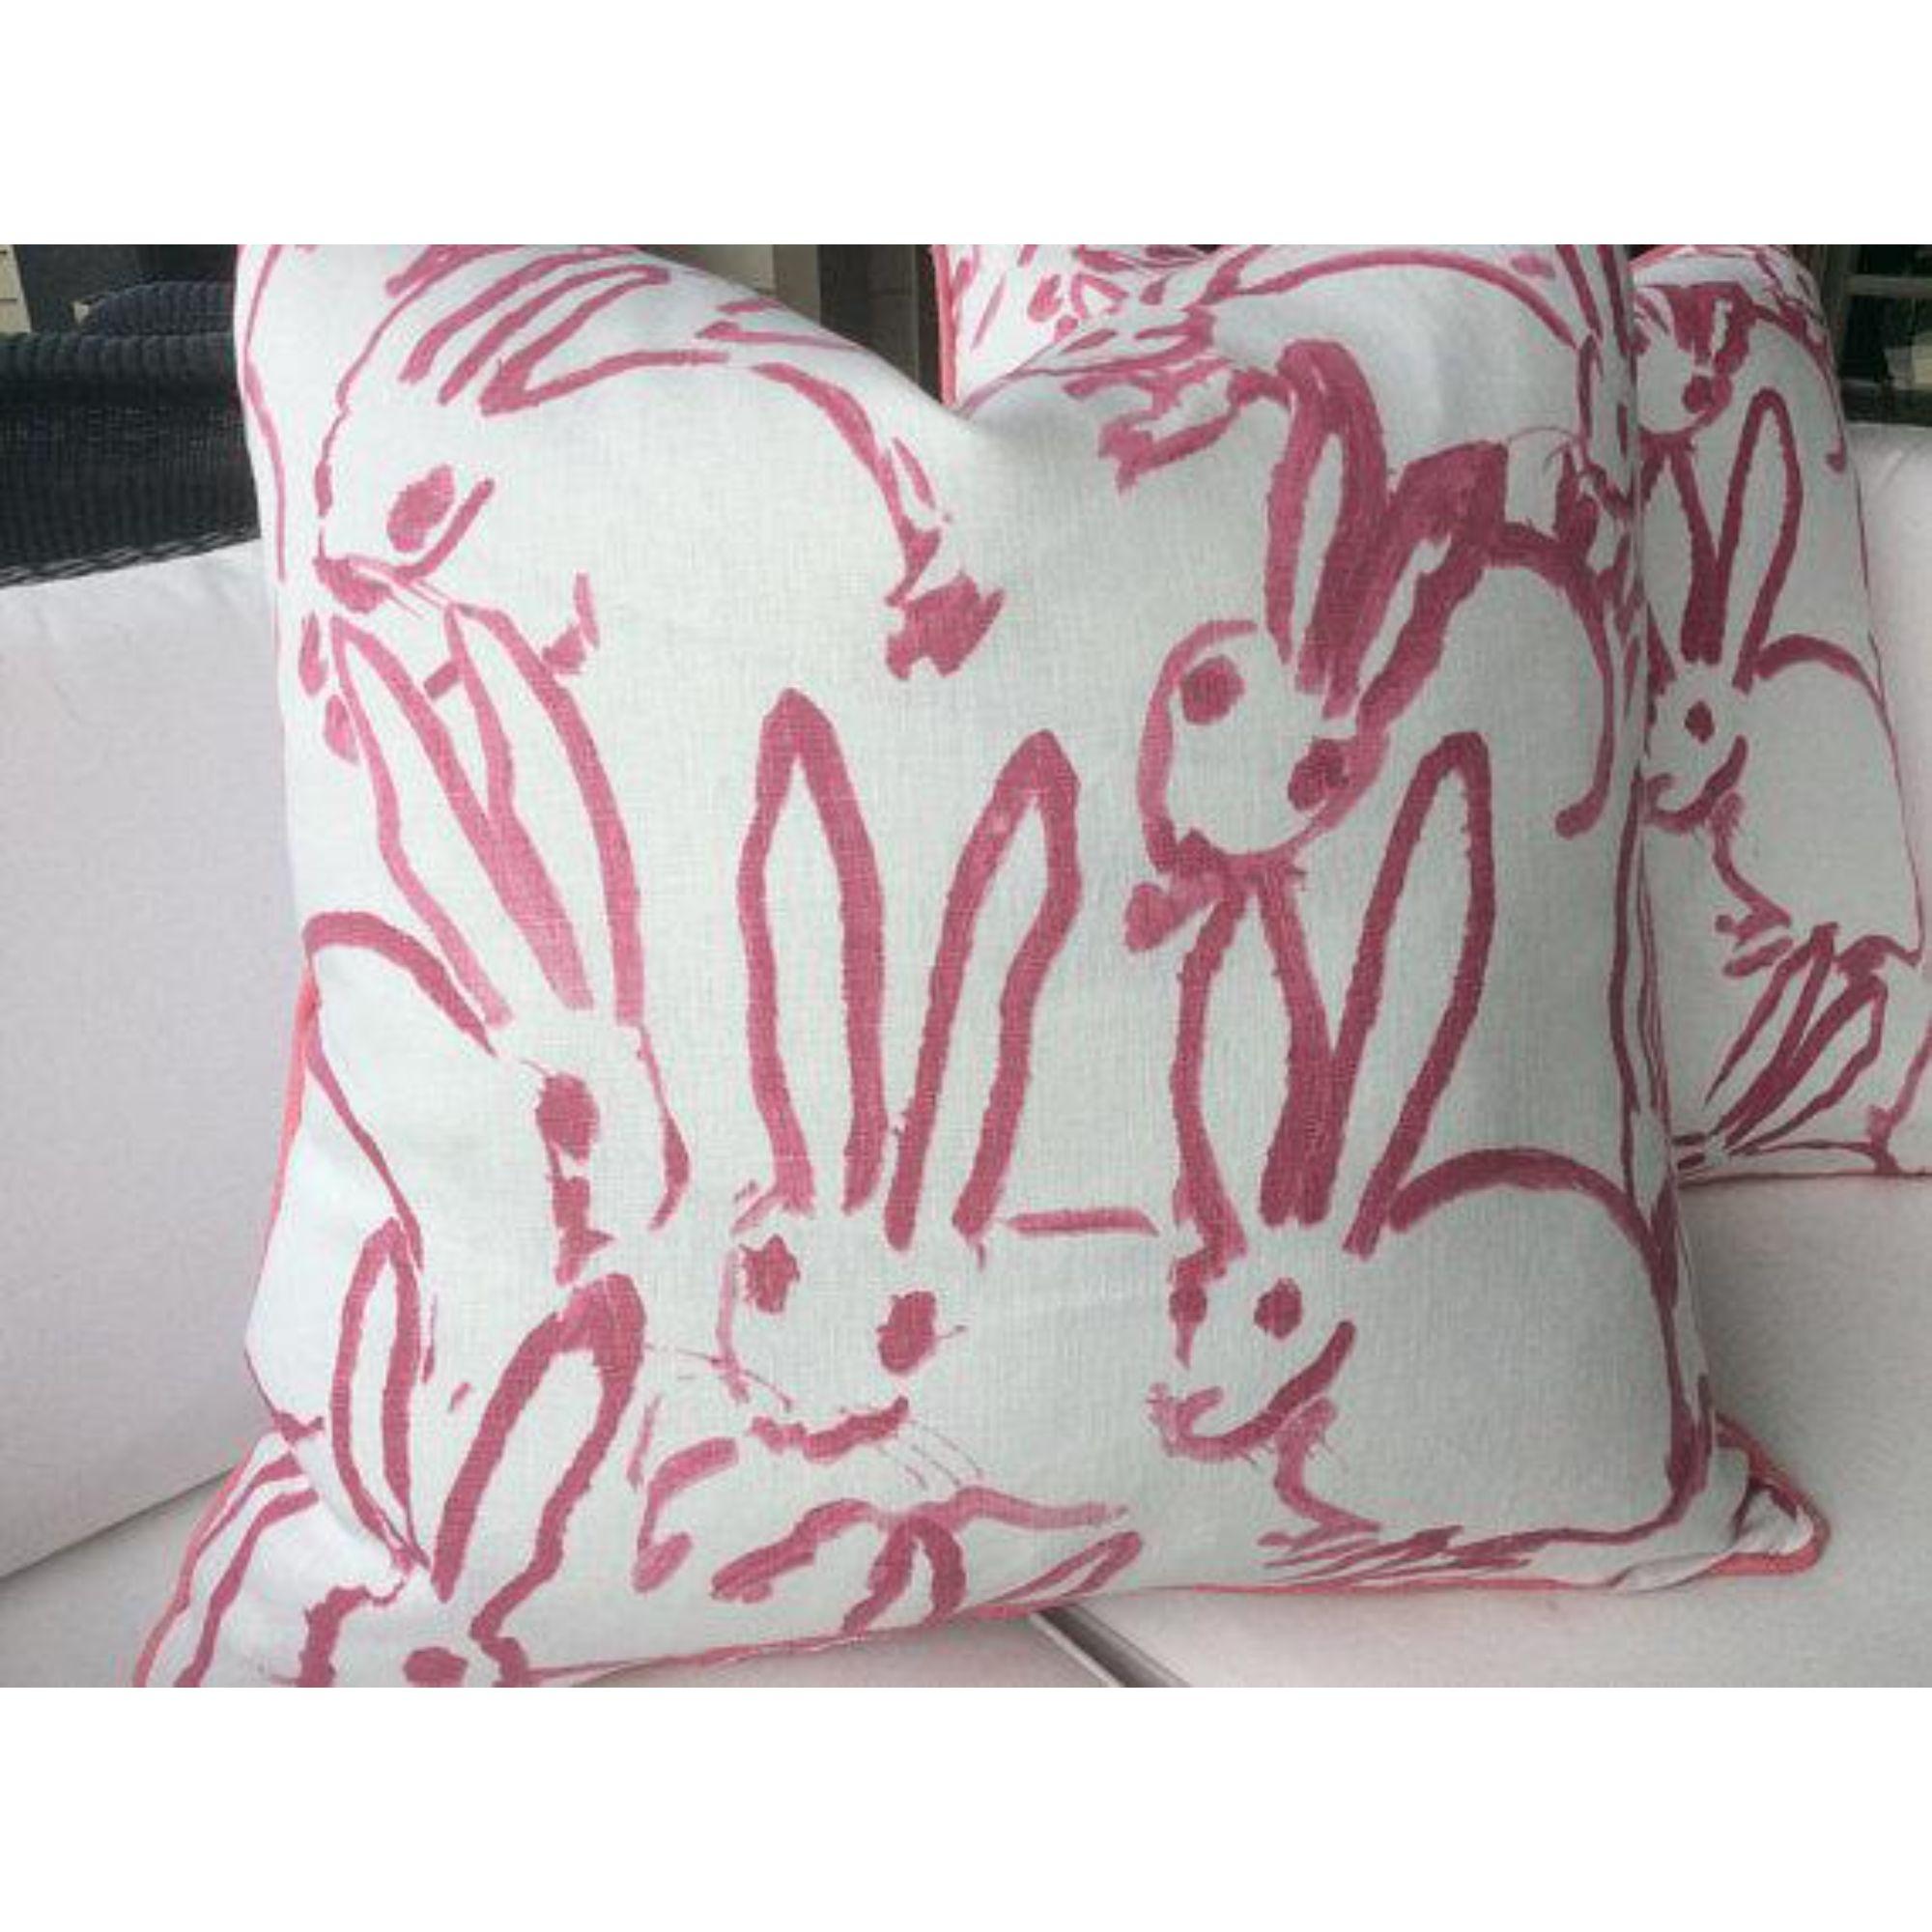 Pink Lee Jofa Hunt Slonen Bunny Hutch Pillows - A Pair In New Condition For Sale In Winder, GA